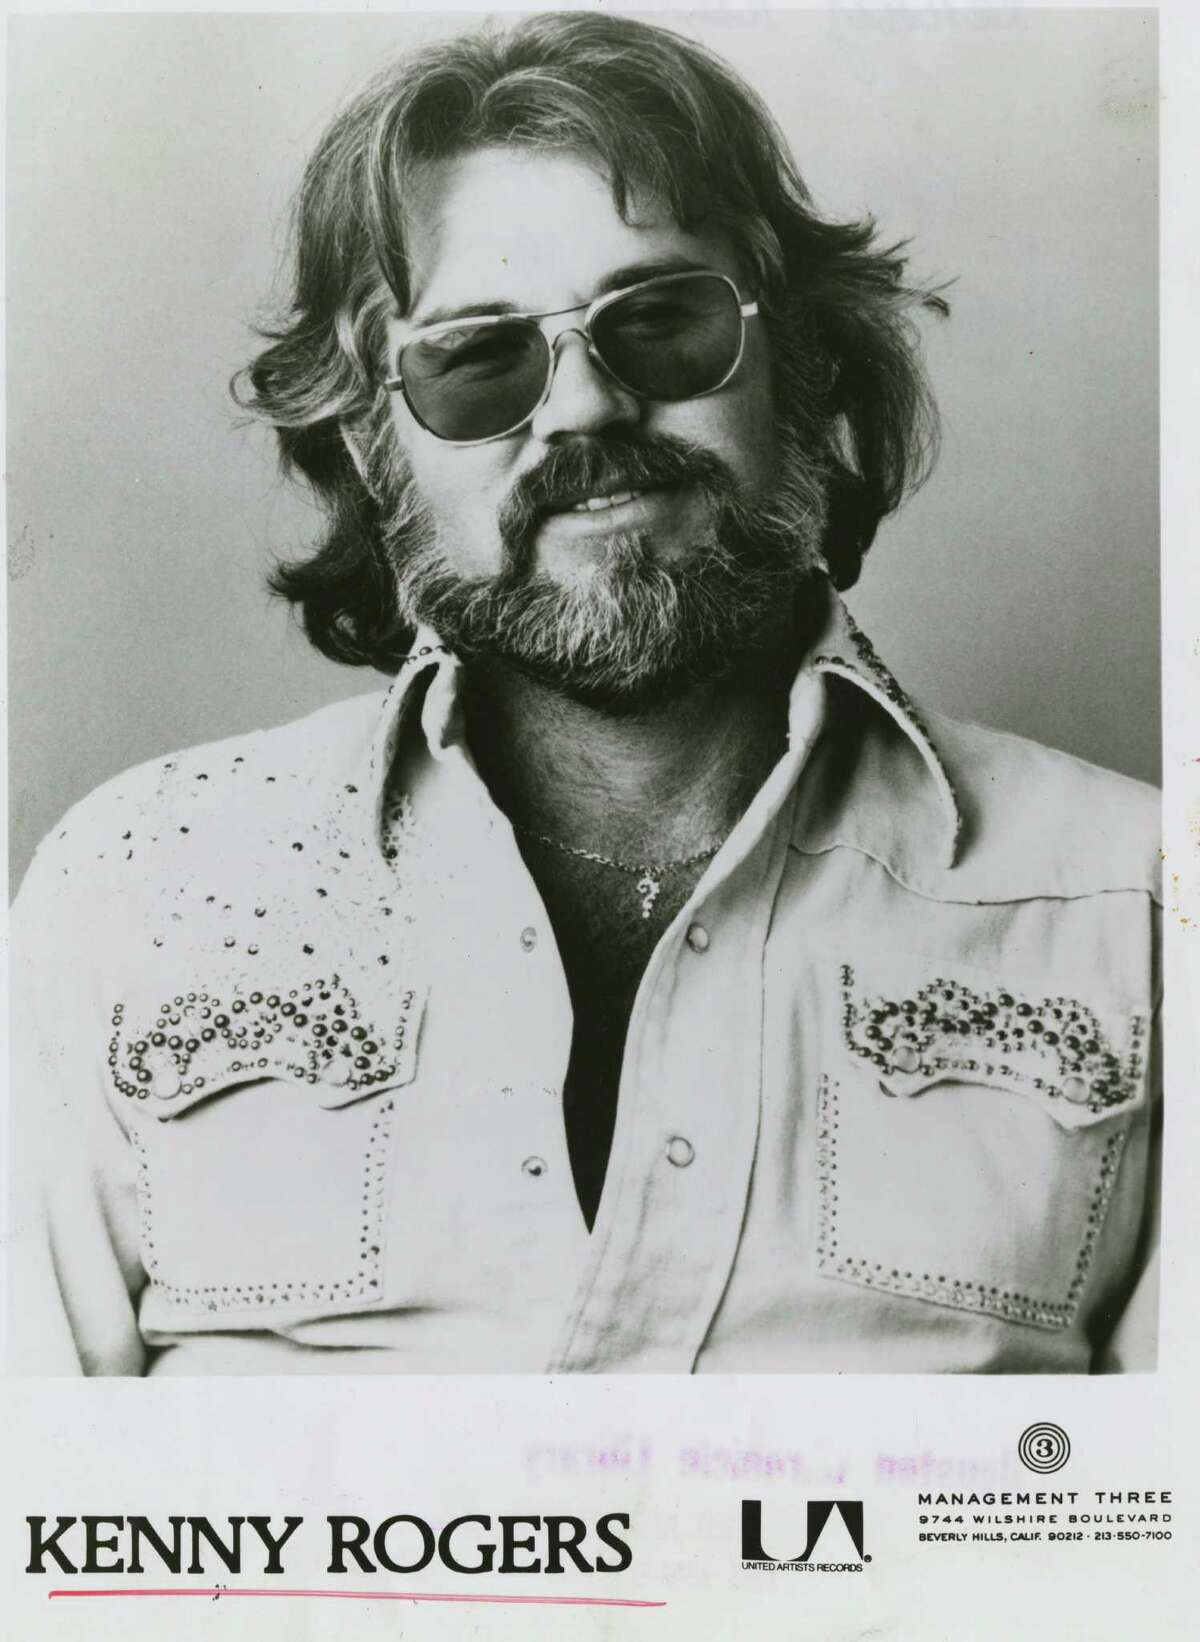 Kenny Rogers' classic hit "The Gambler" is being recognized by the Library of Congress. Here's the Houston native in 1977.